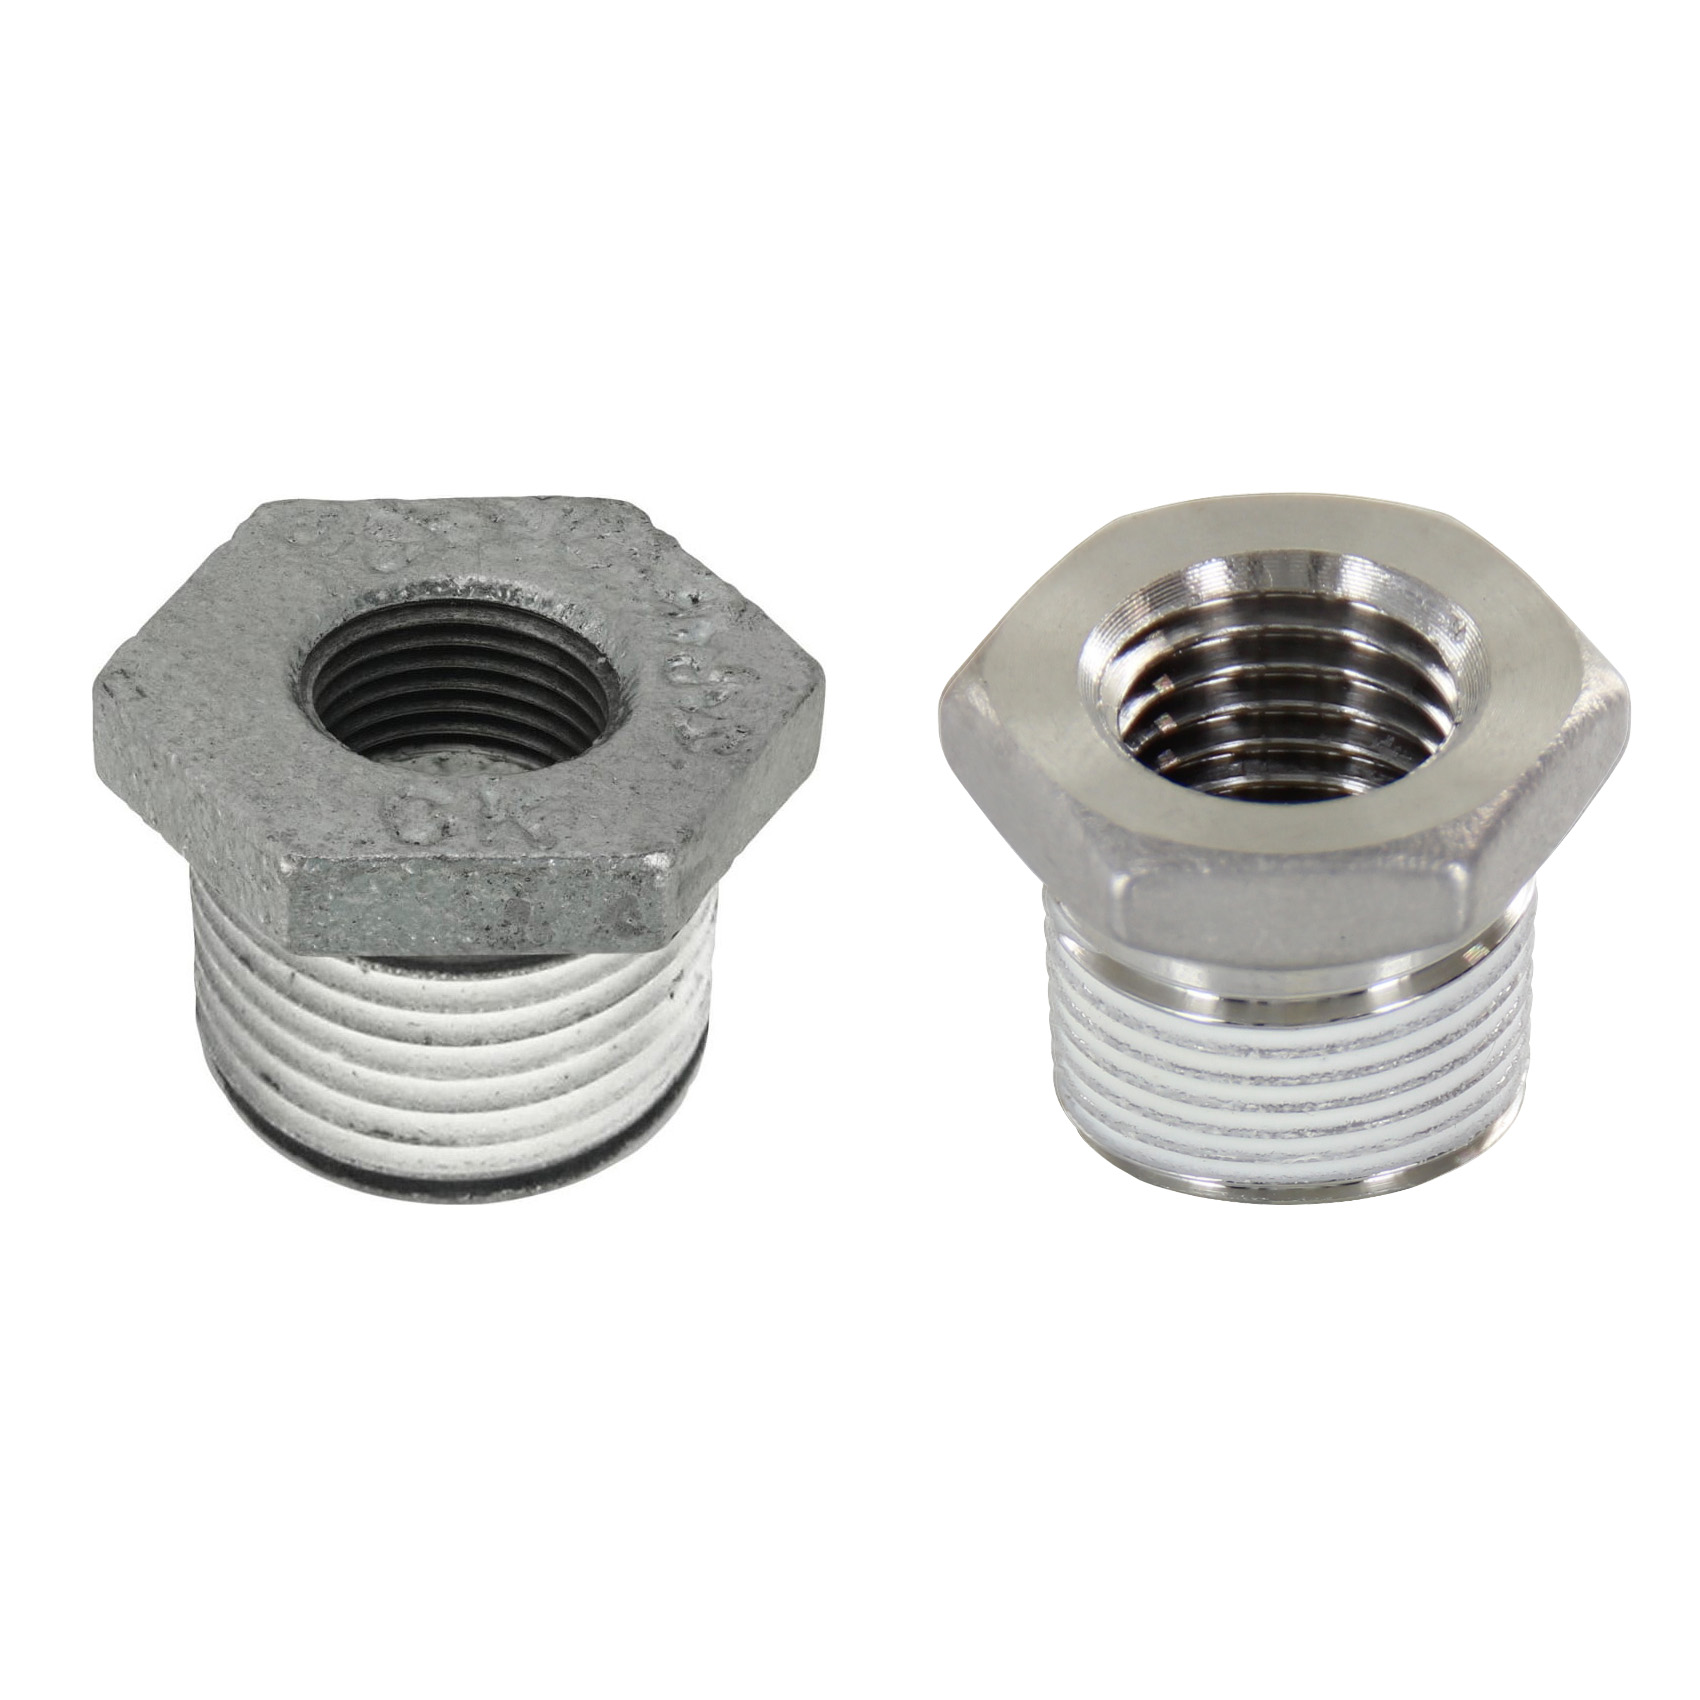 Low Pressure Fittings / With Seal Coating / Bushing